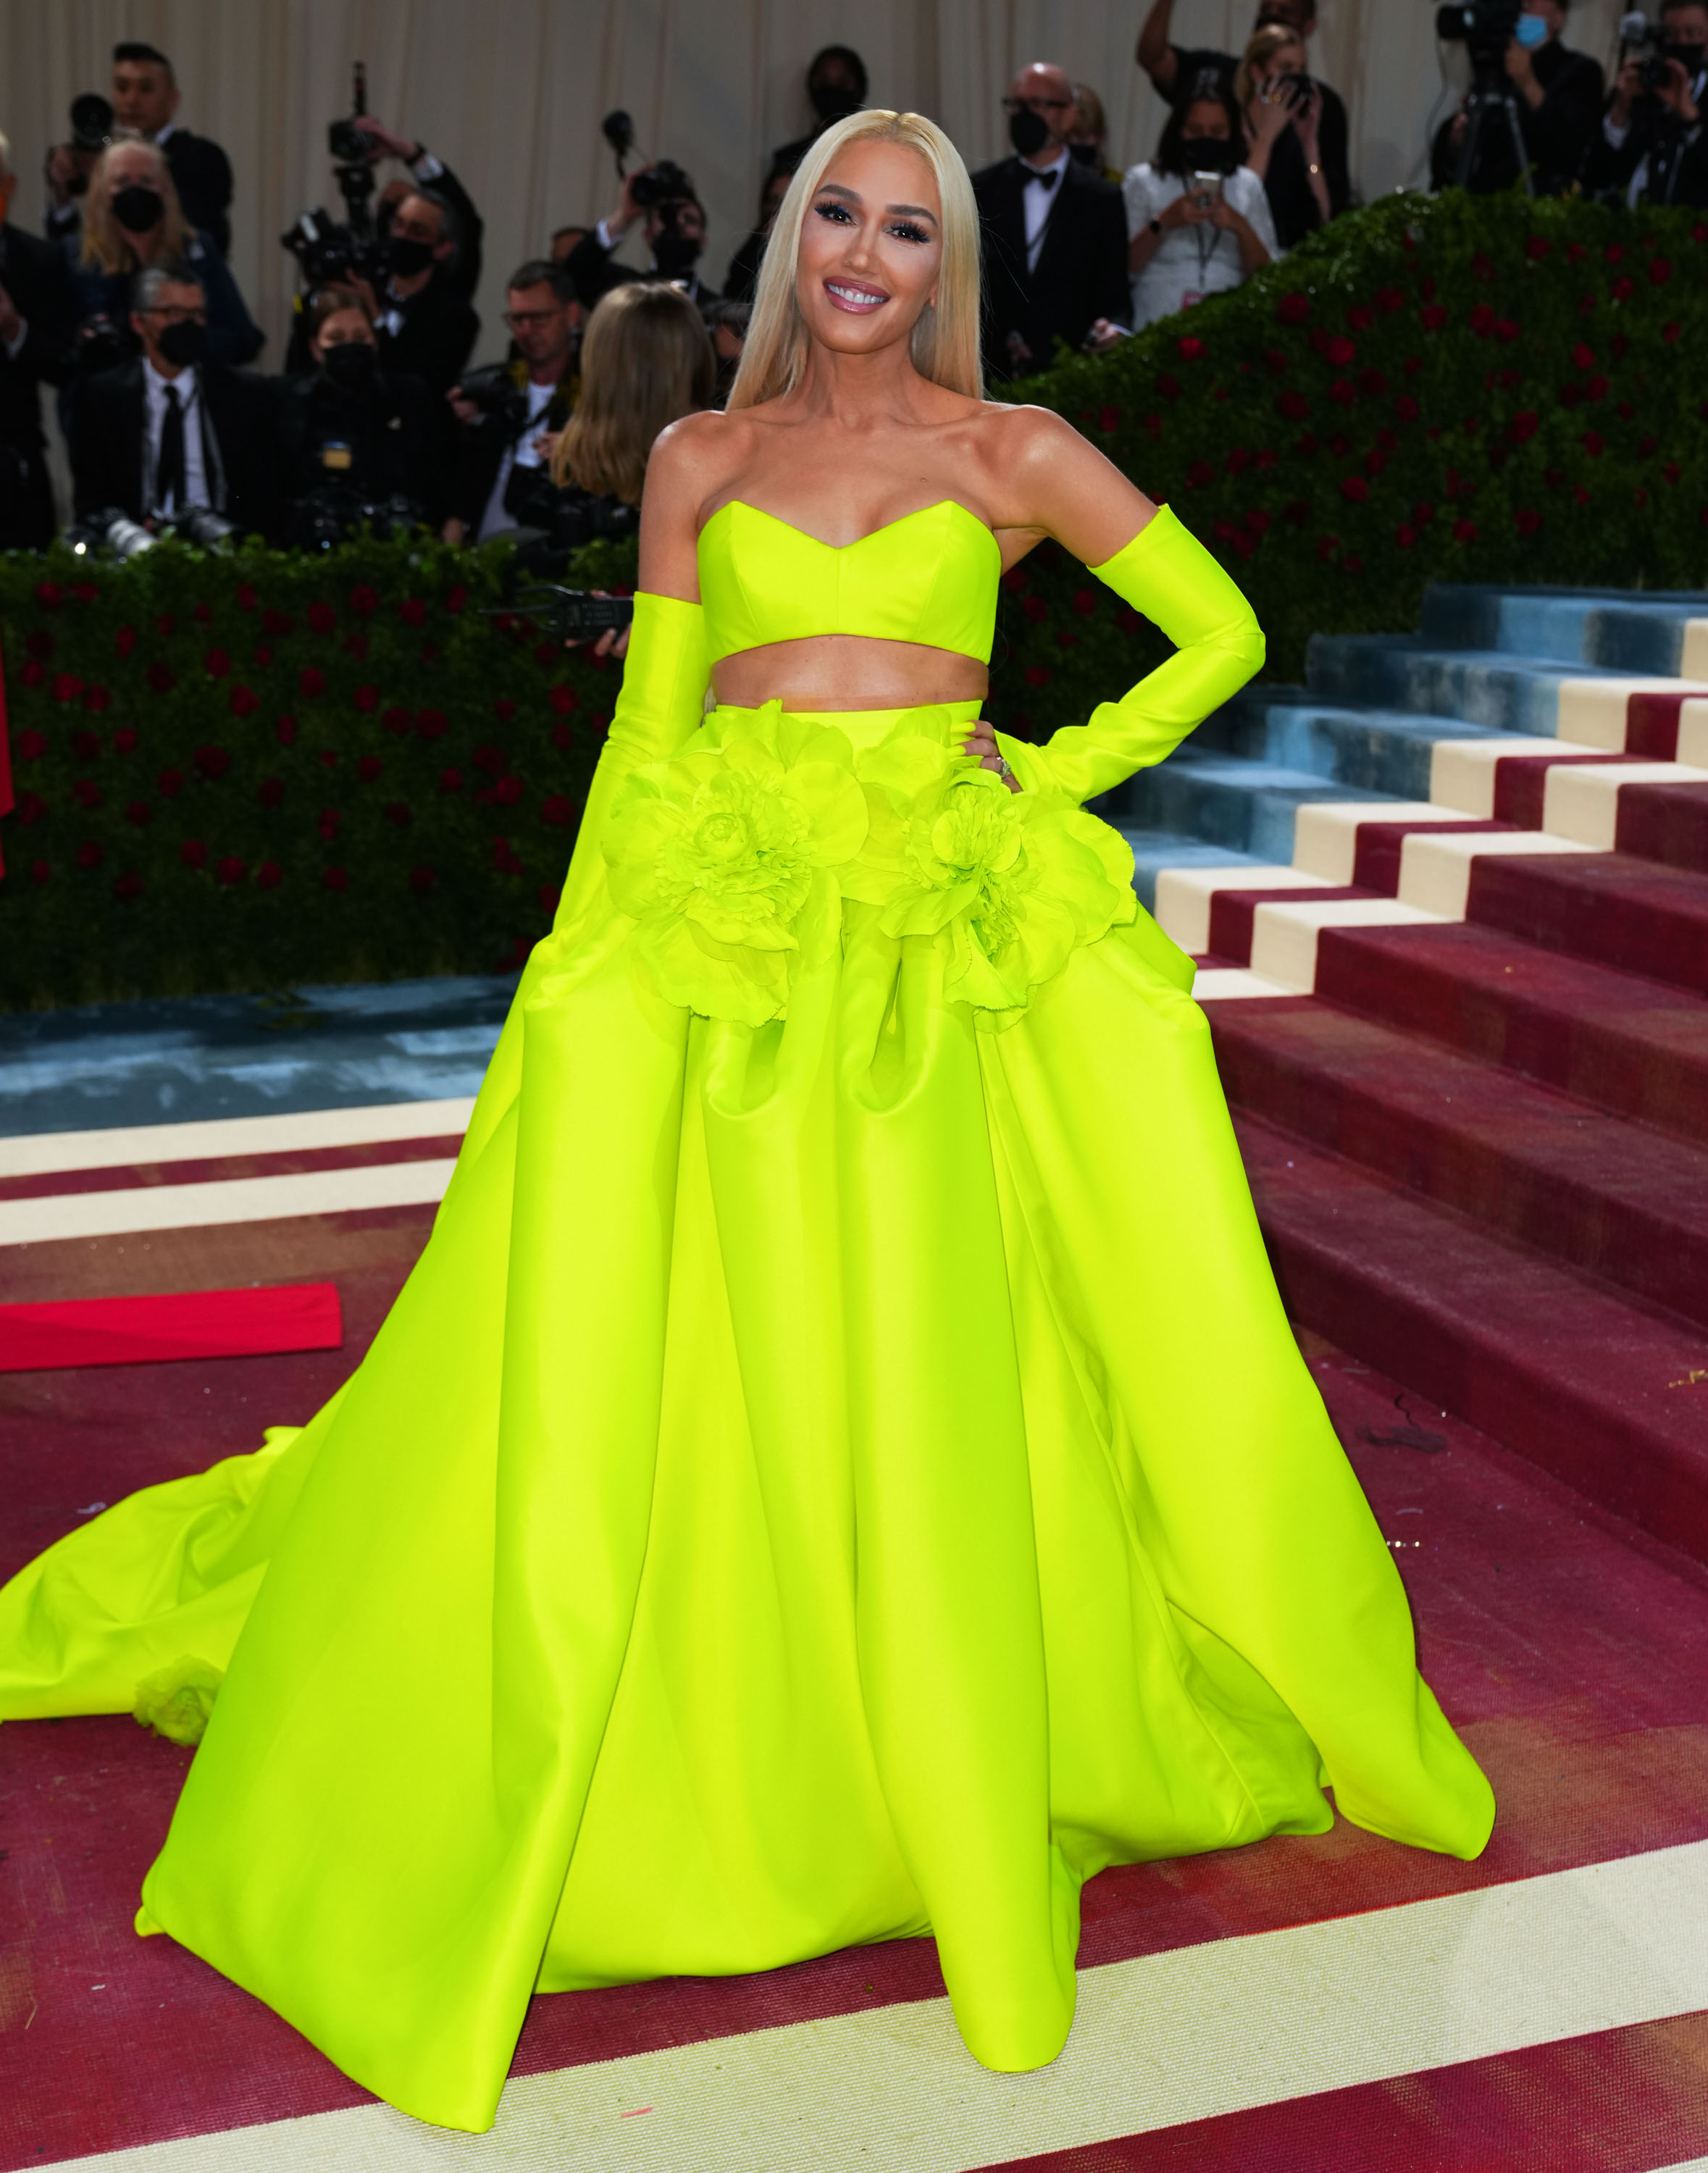 Gwen Stefani at the 2022 Met Gala | Source: Getty Images